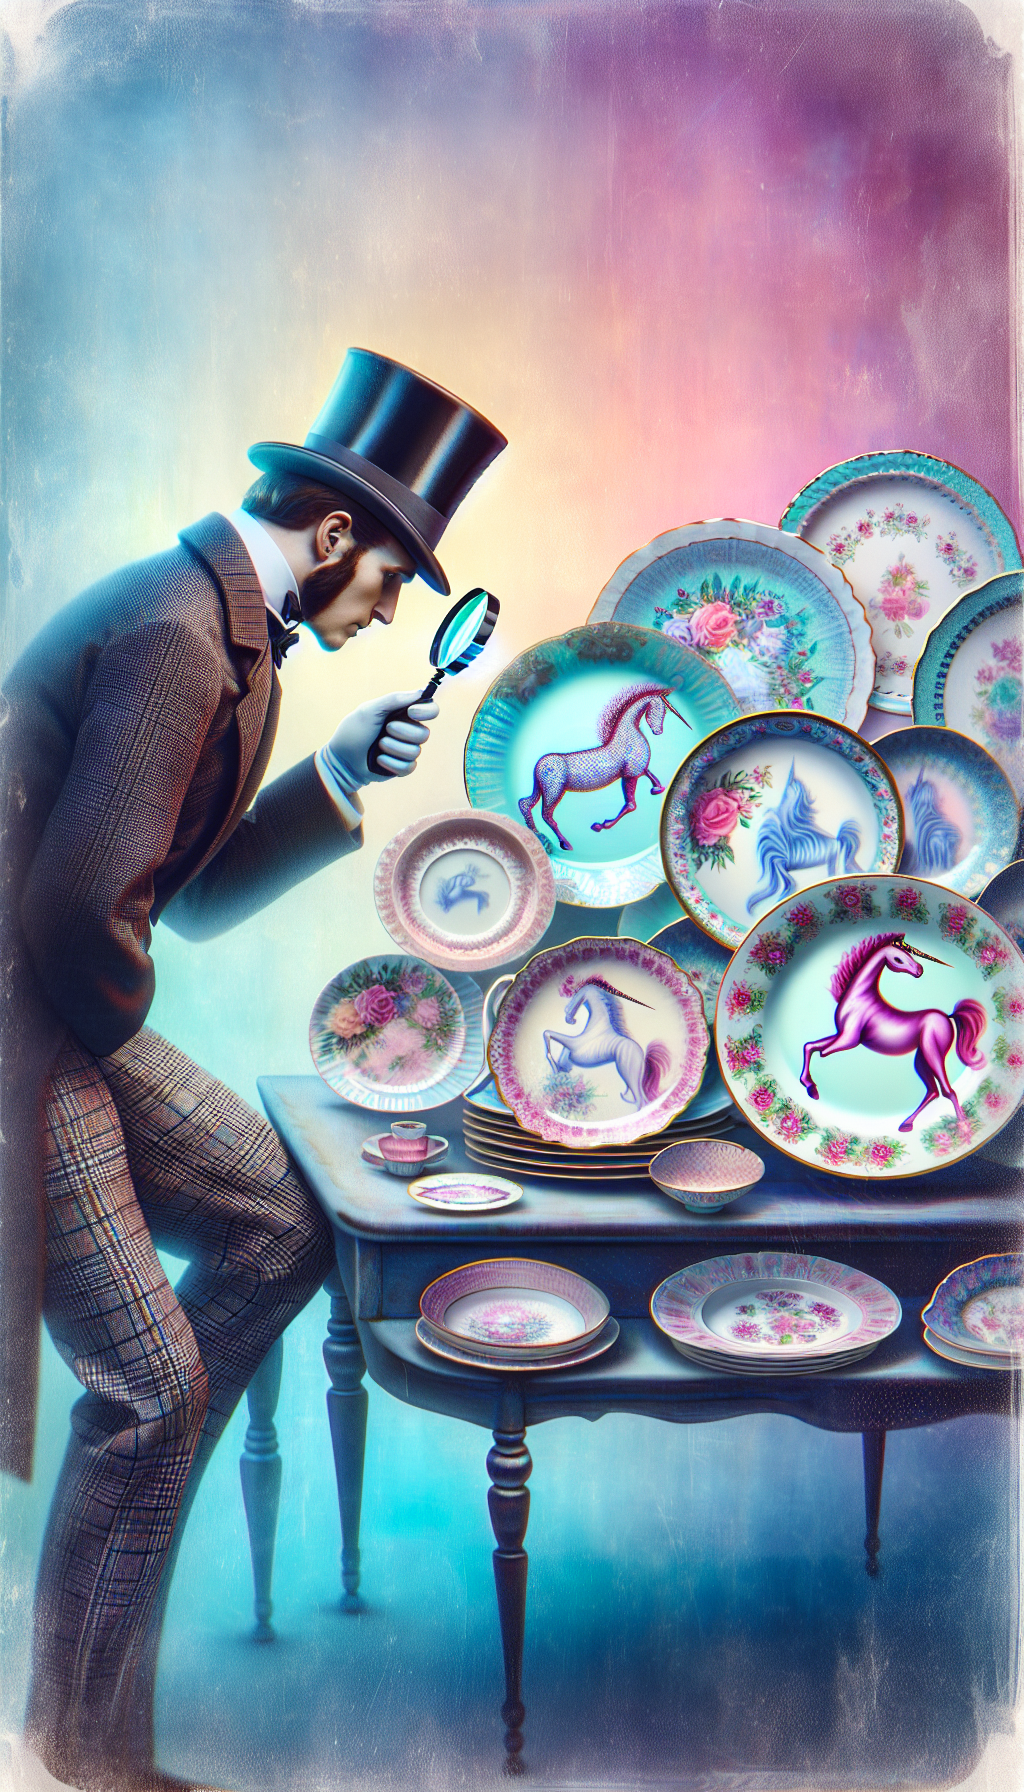 In a whimsical kitchen setting, a vintage-styled detective with a magnifying glass kneels down, scrutinizing a lineup of CorningWare dishes each donning a different pattern. A whimsical, slightly translucent unicorn subtly blended into one of the patterns symbolizes the rare find. The hazy outlines and soft pastel color palette create a dreamy contrast to the sharp focus on the 'unicorn' dish.